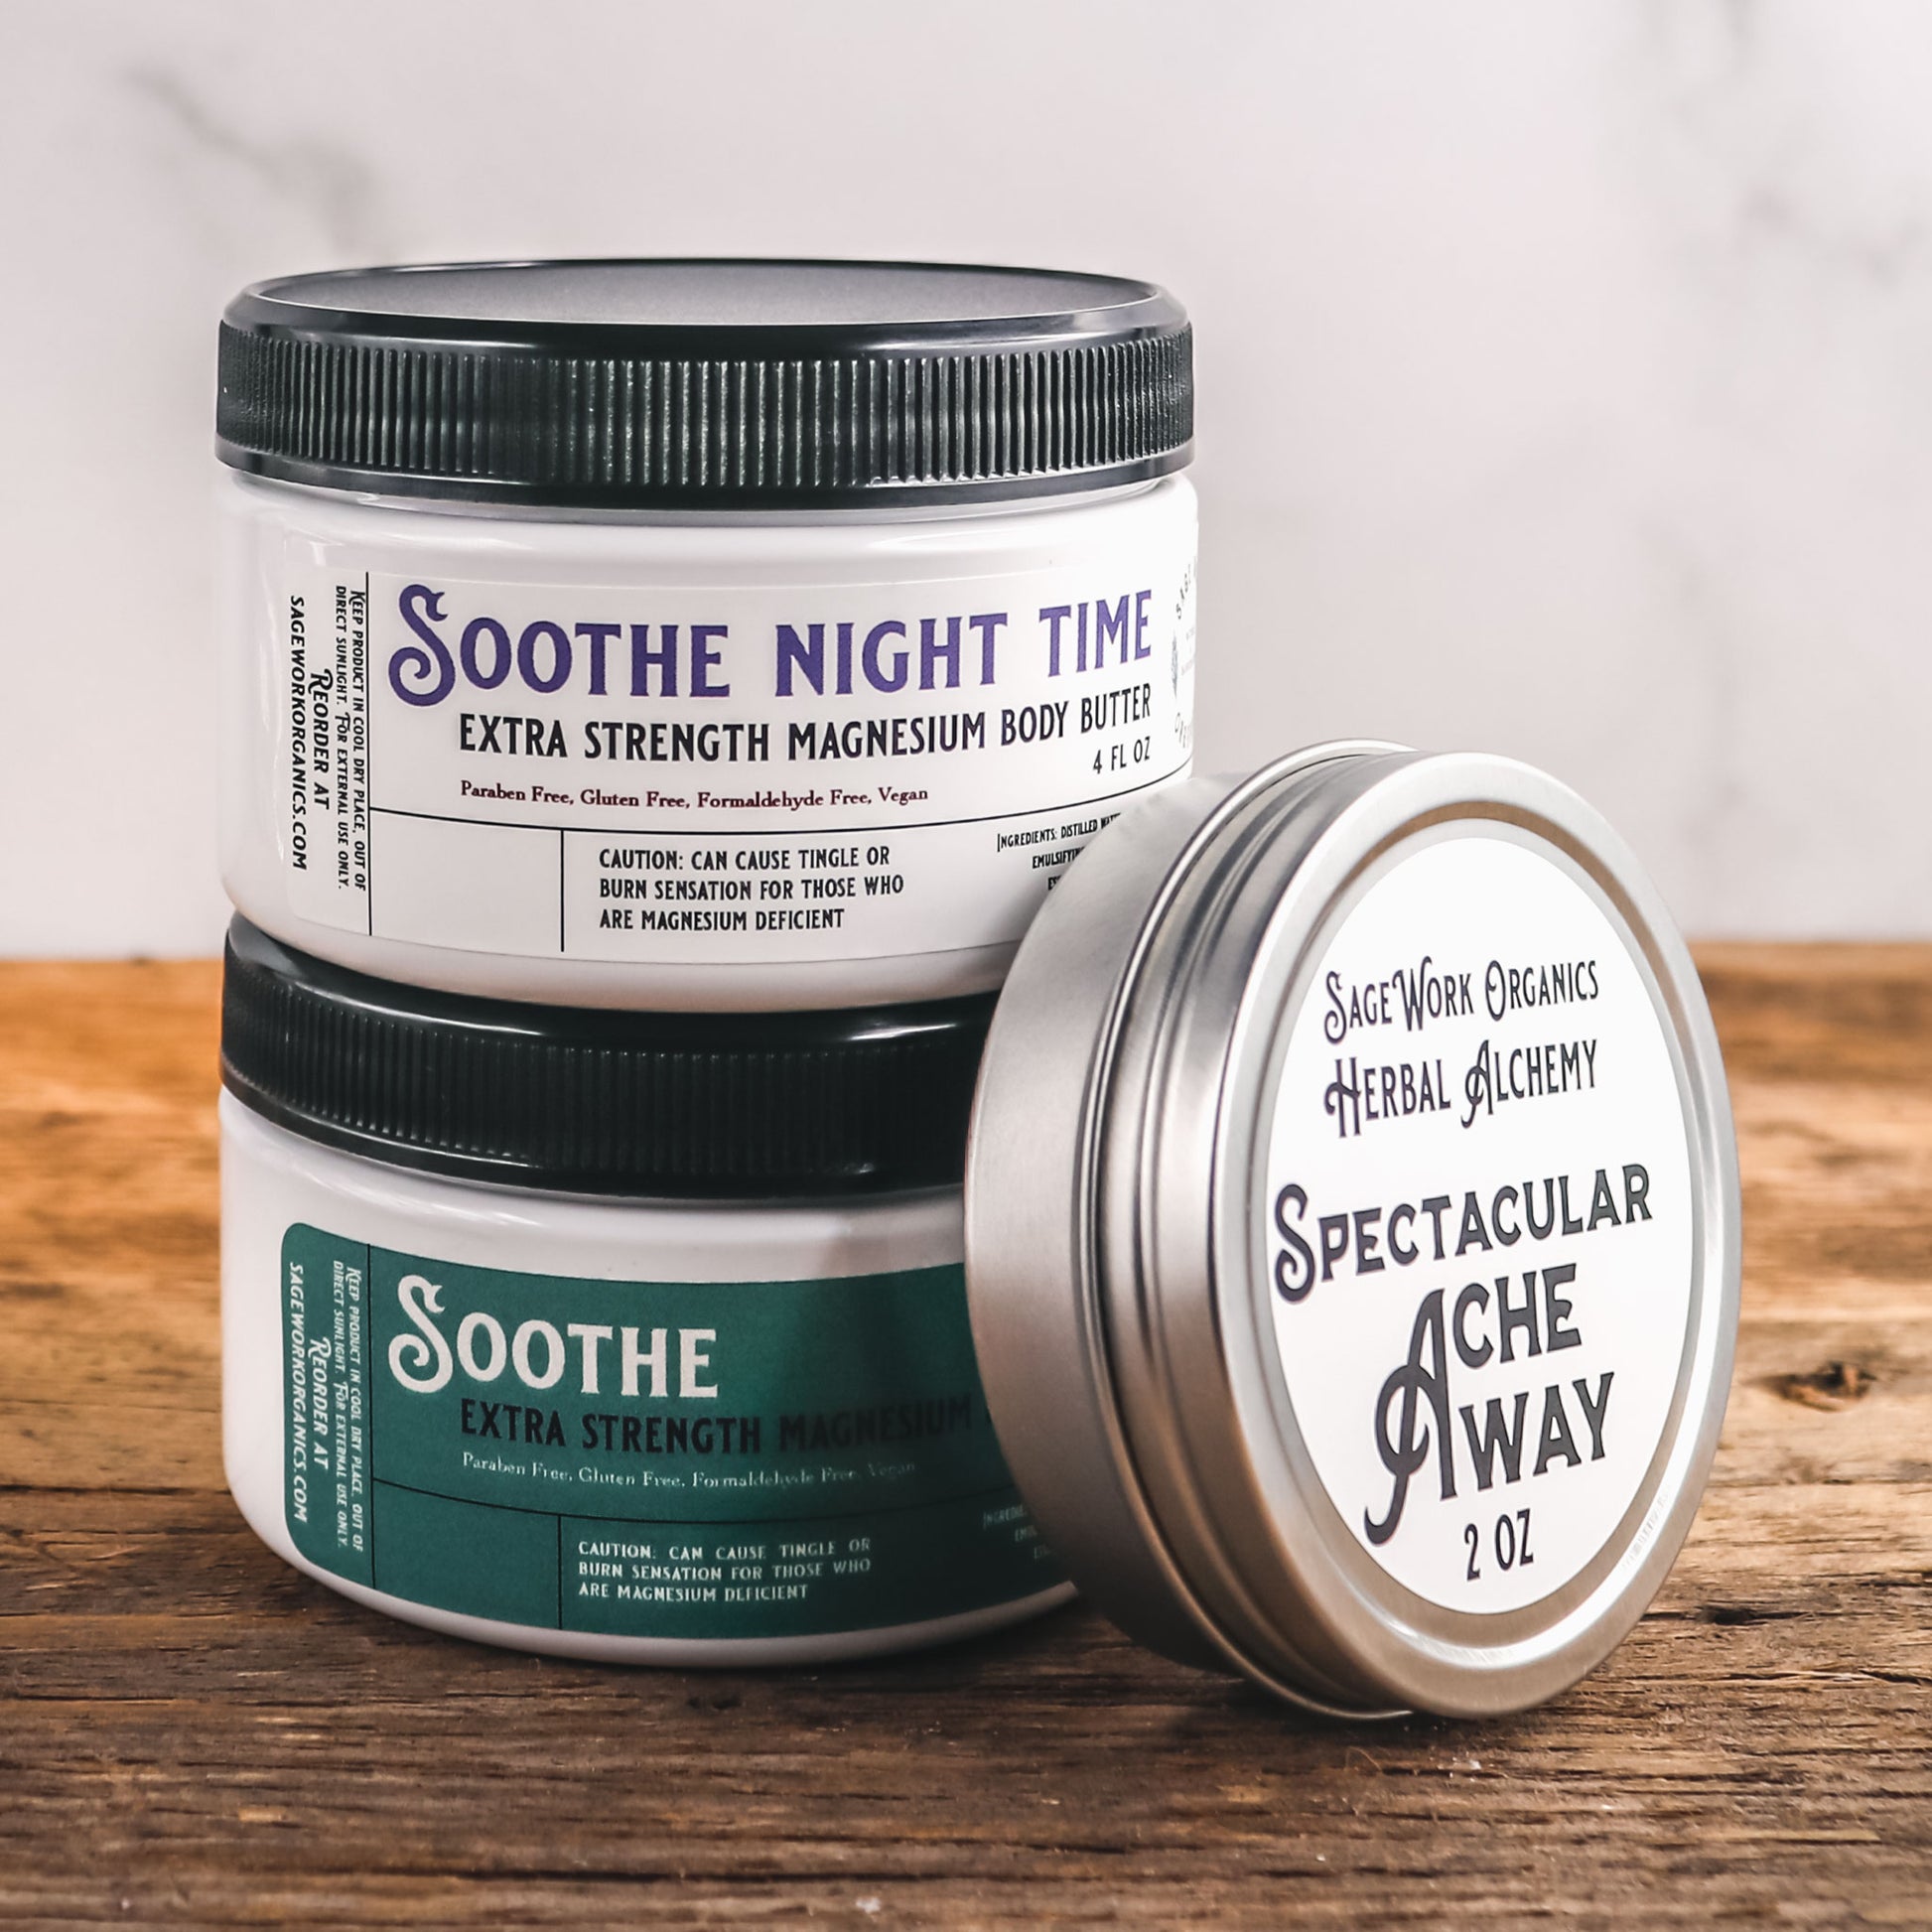 Soothe & Ache Away Bundle 3 pc with Essential Oils